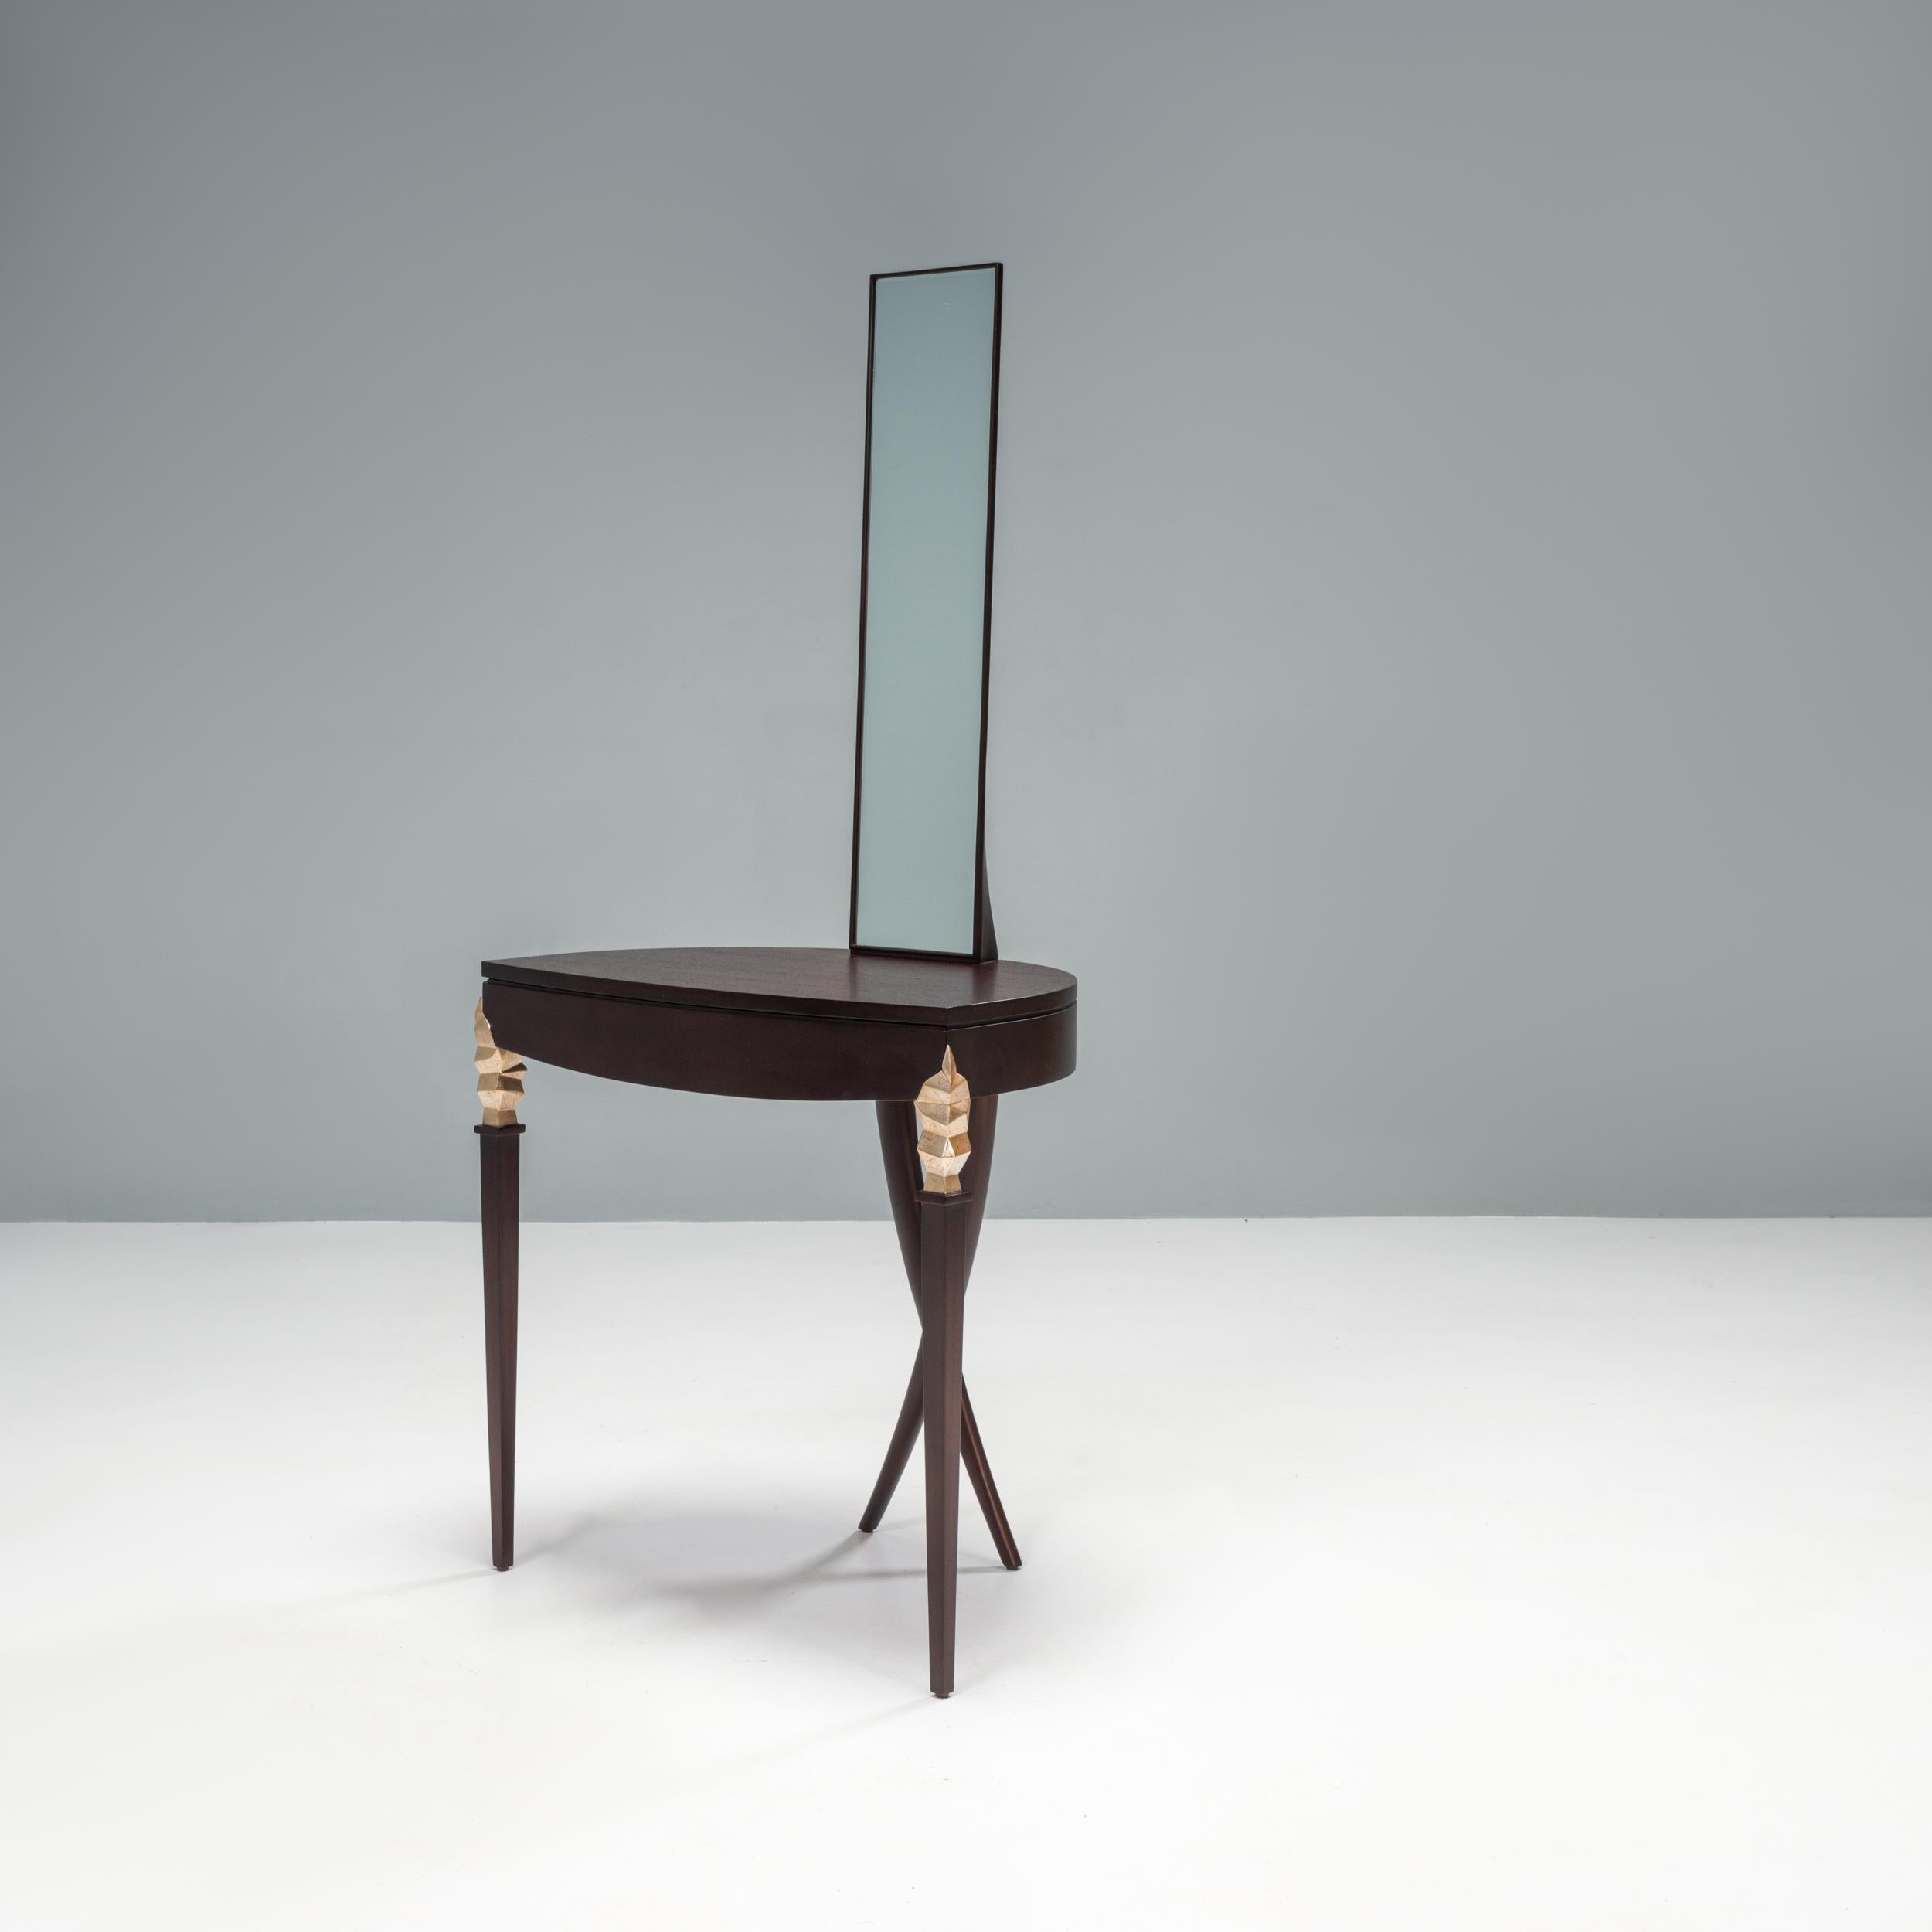 Designed by Christoper Guy and manufactured by skilled artisans in Indonesia, this Statuesque vanity table is inspired by the Art Deco era.

Constructed from hand carved mahogany wood, the table features tapered legs with engraved detailing at the